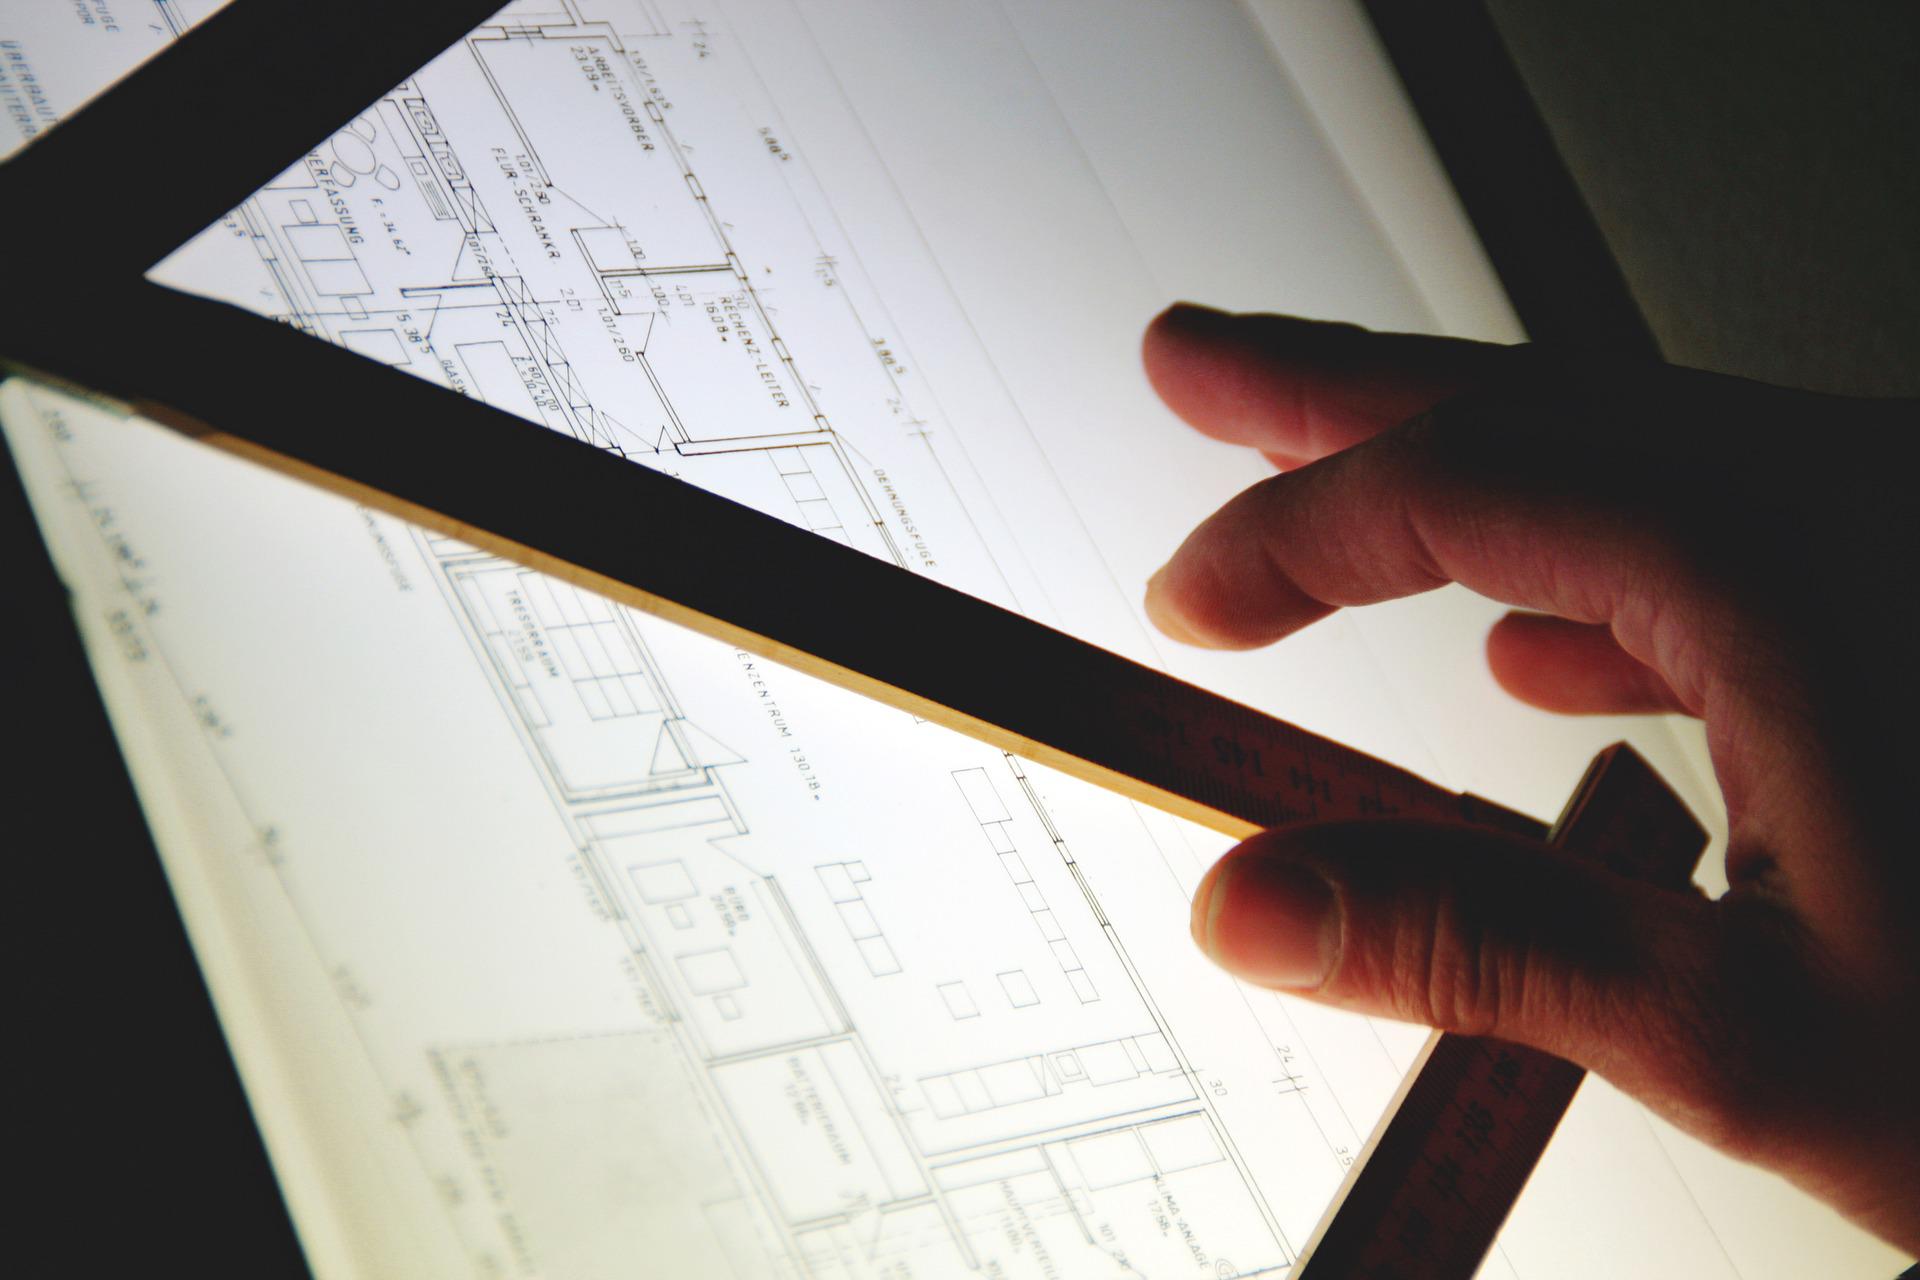 What Plans Require Drawings For Planning Permission?